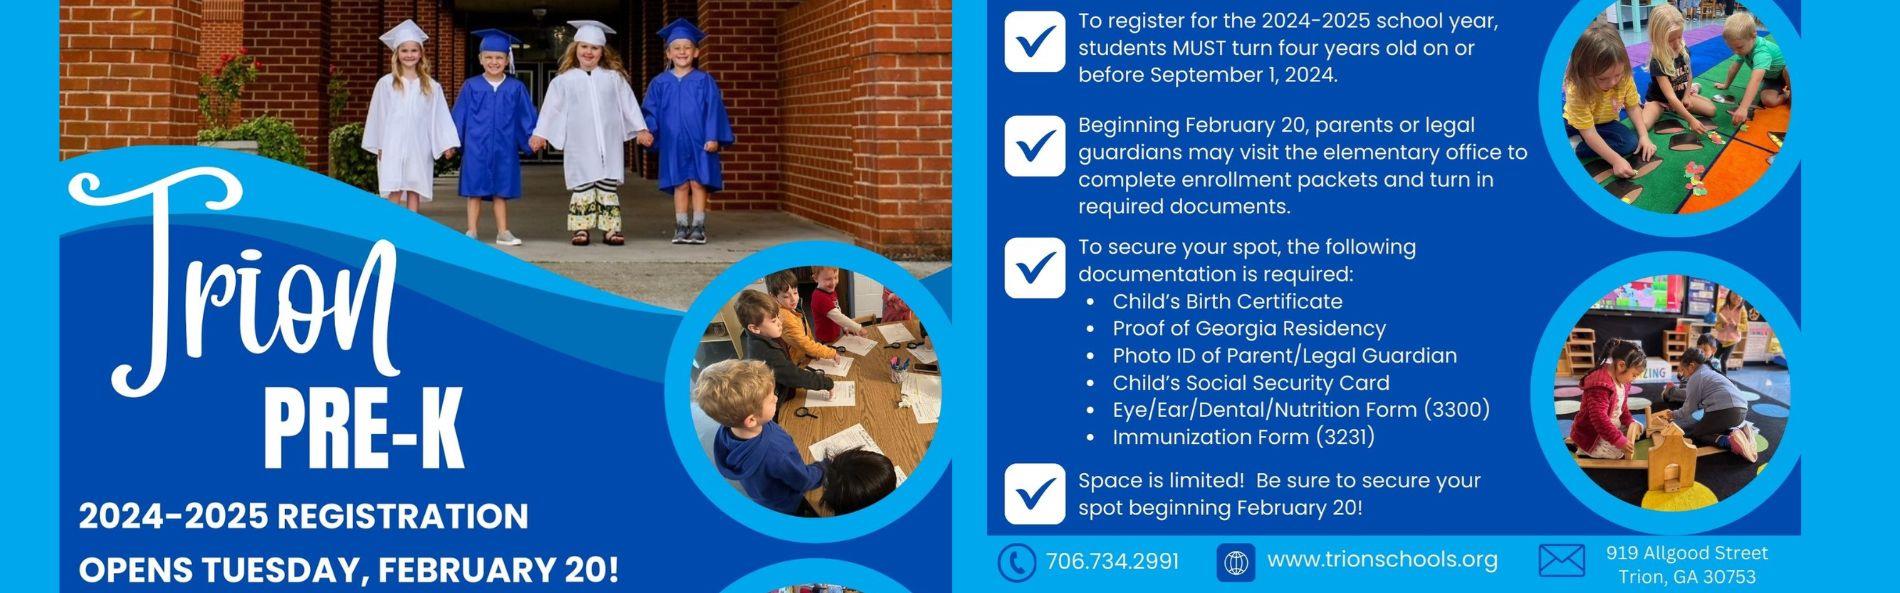 PREK REGISTRATION BEGINS FEBRUARY 20TH: MORE INFORMATION TO COME LATER